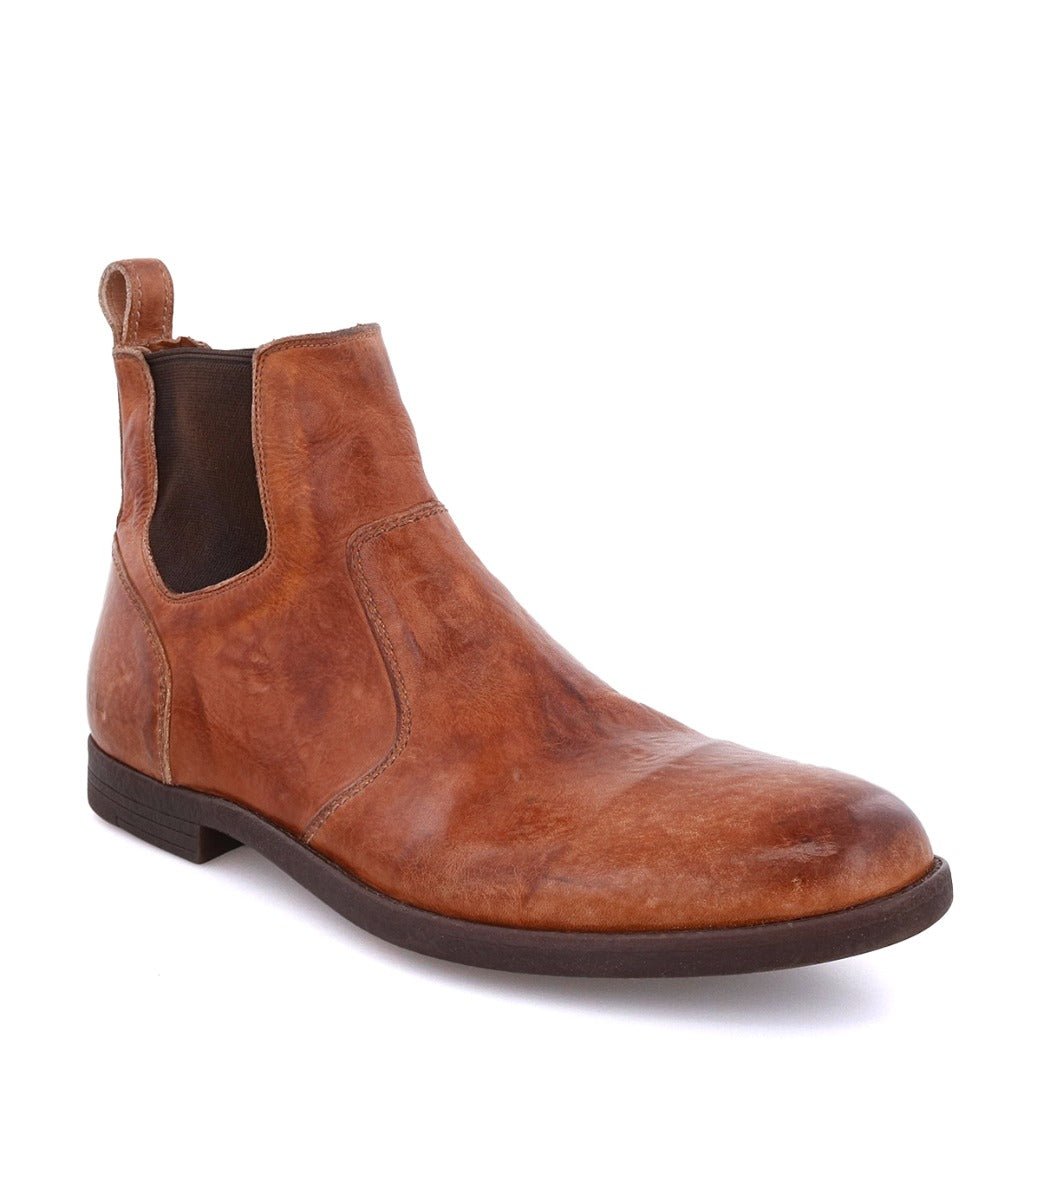 A Vasari tan leather chelsea boot on a white background from Bed Stu.